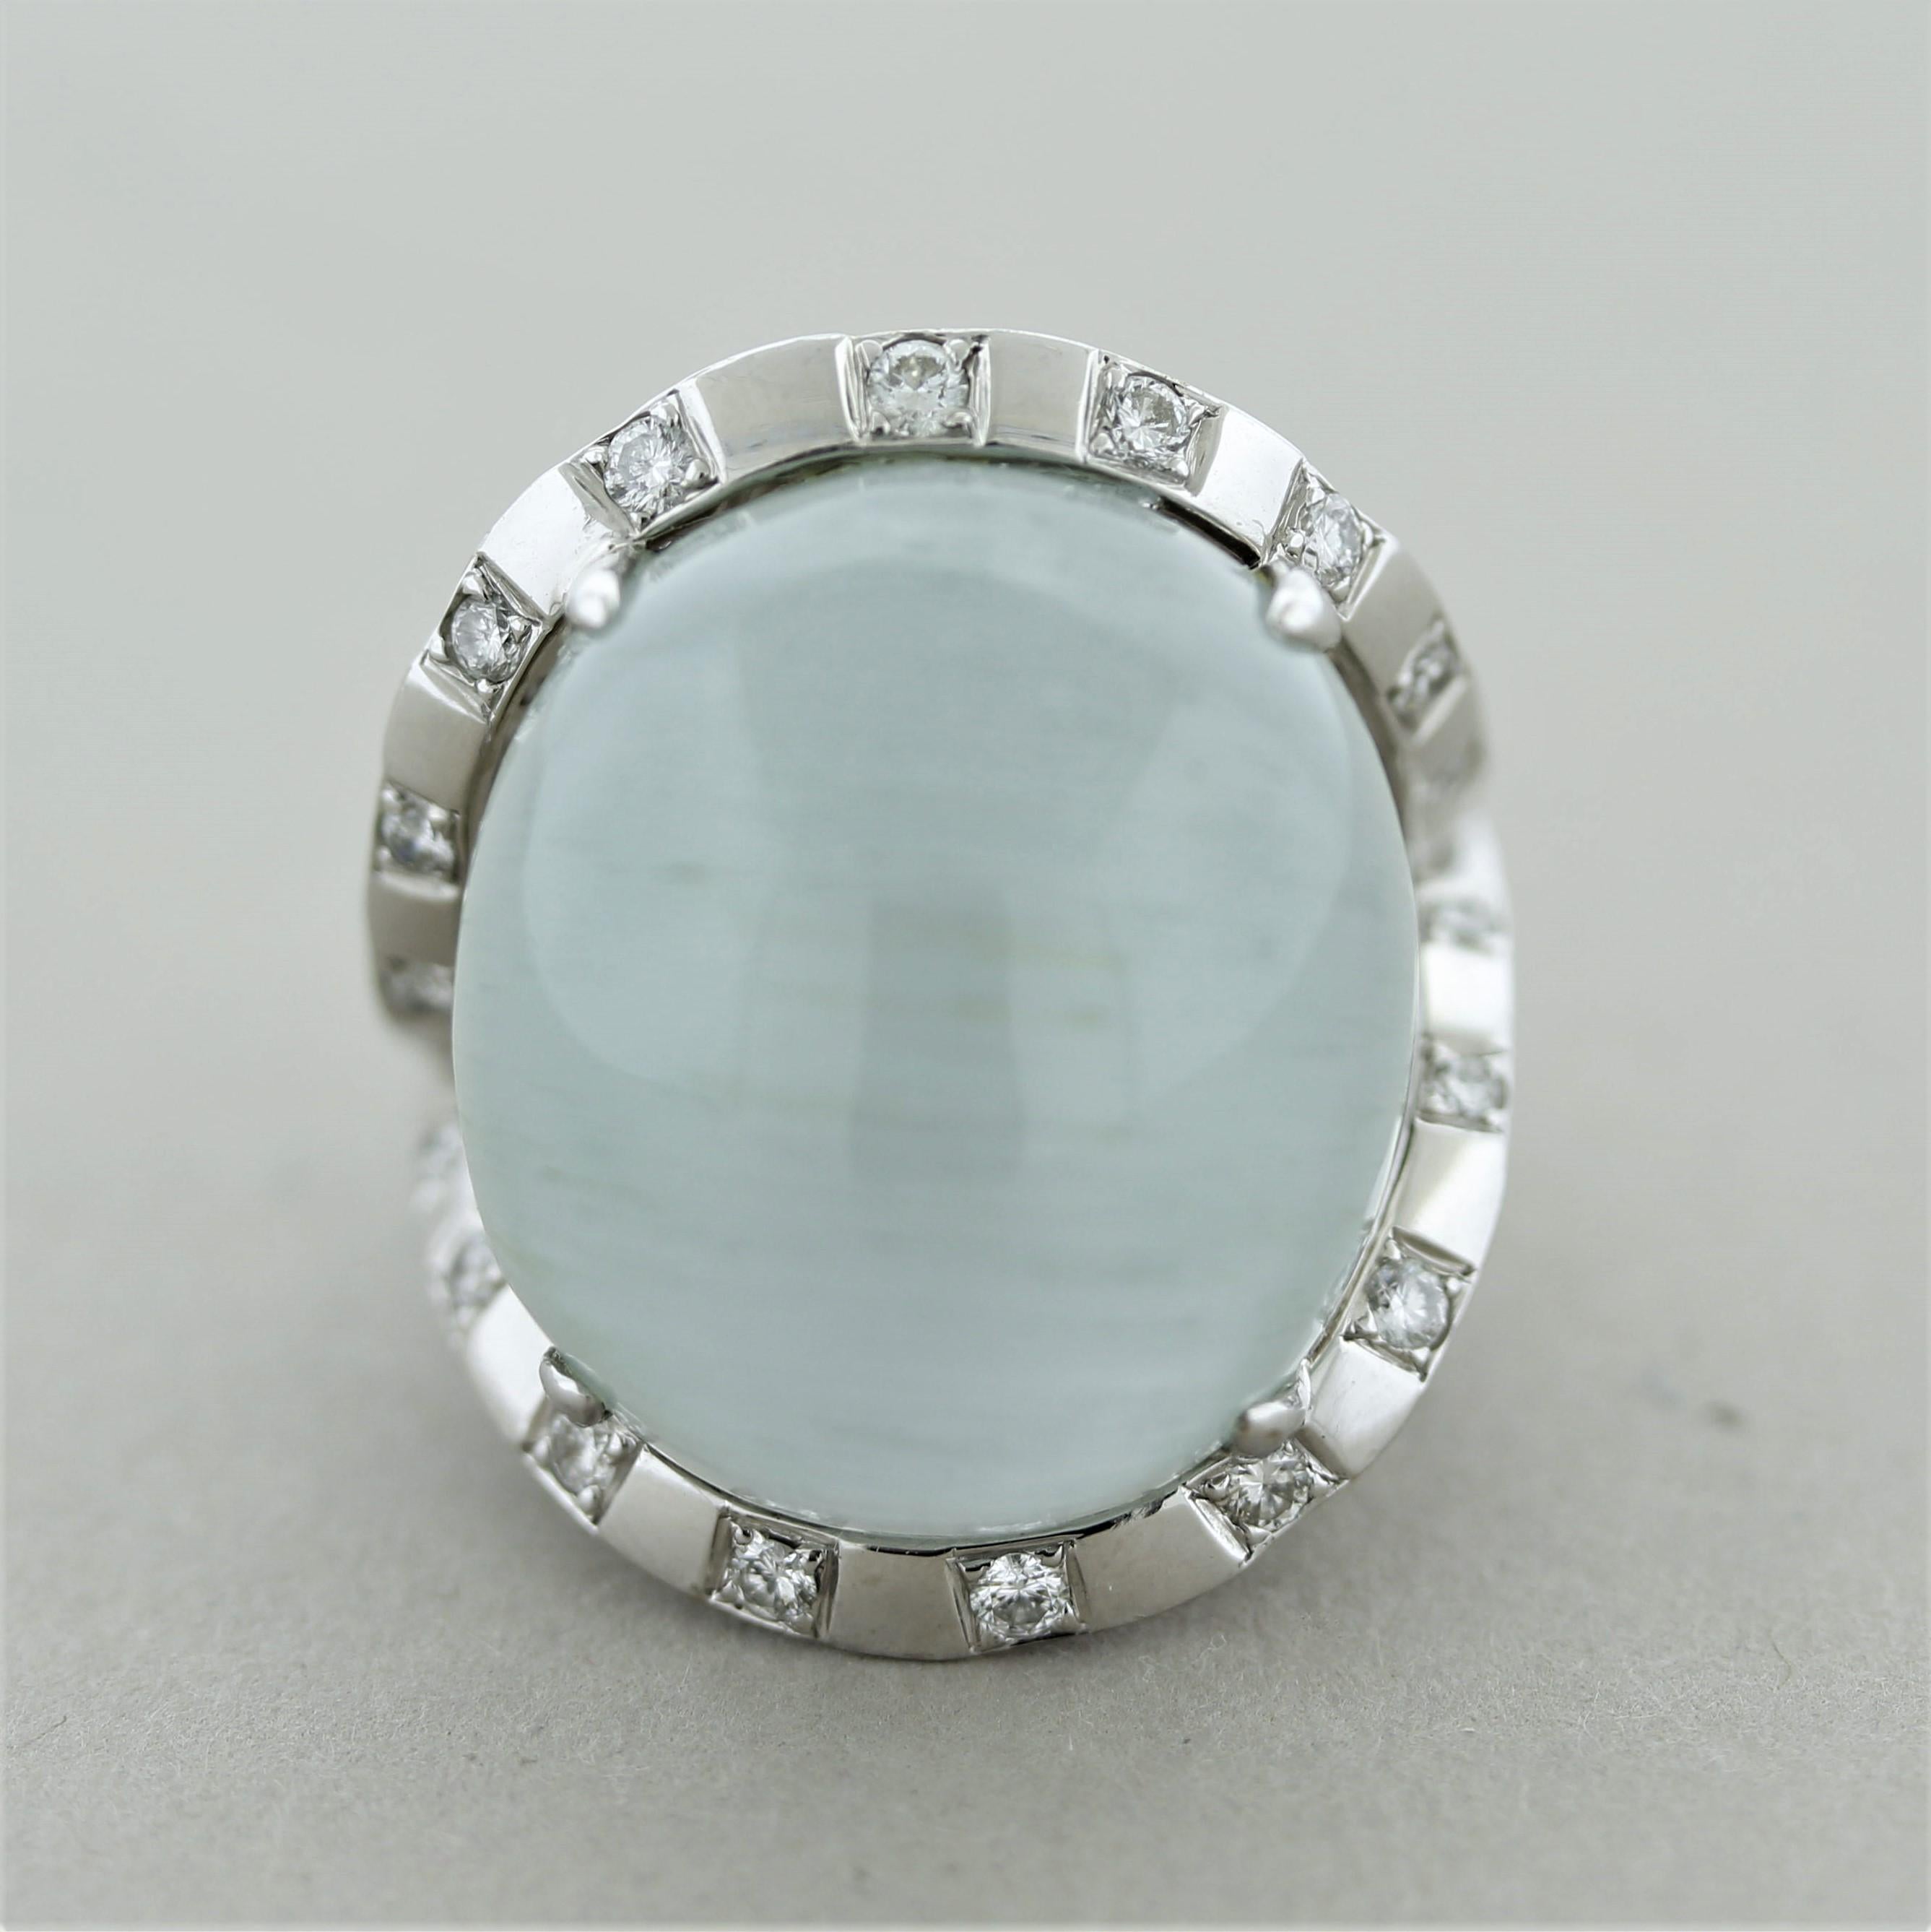 A large, unique and rare gemstone! The ring features a 32.42 carat cabochon aquamarine with a rare cats eye effect. Natural growth tubes in the stone run across it horizontally which creates the “cats eye” effect. Accenting the fun aquamarine are